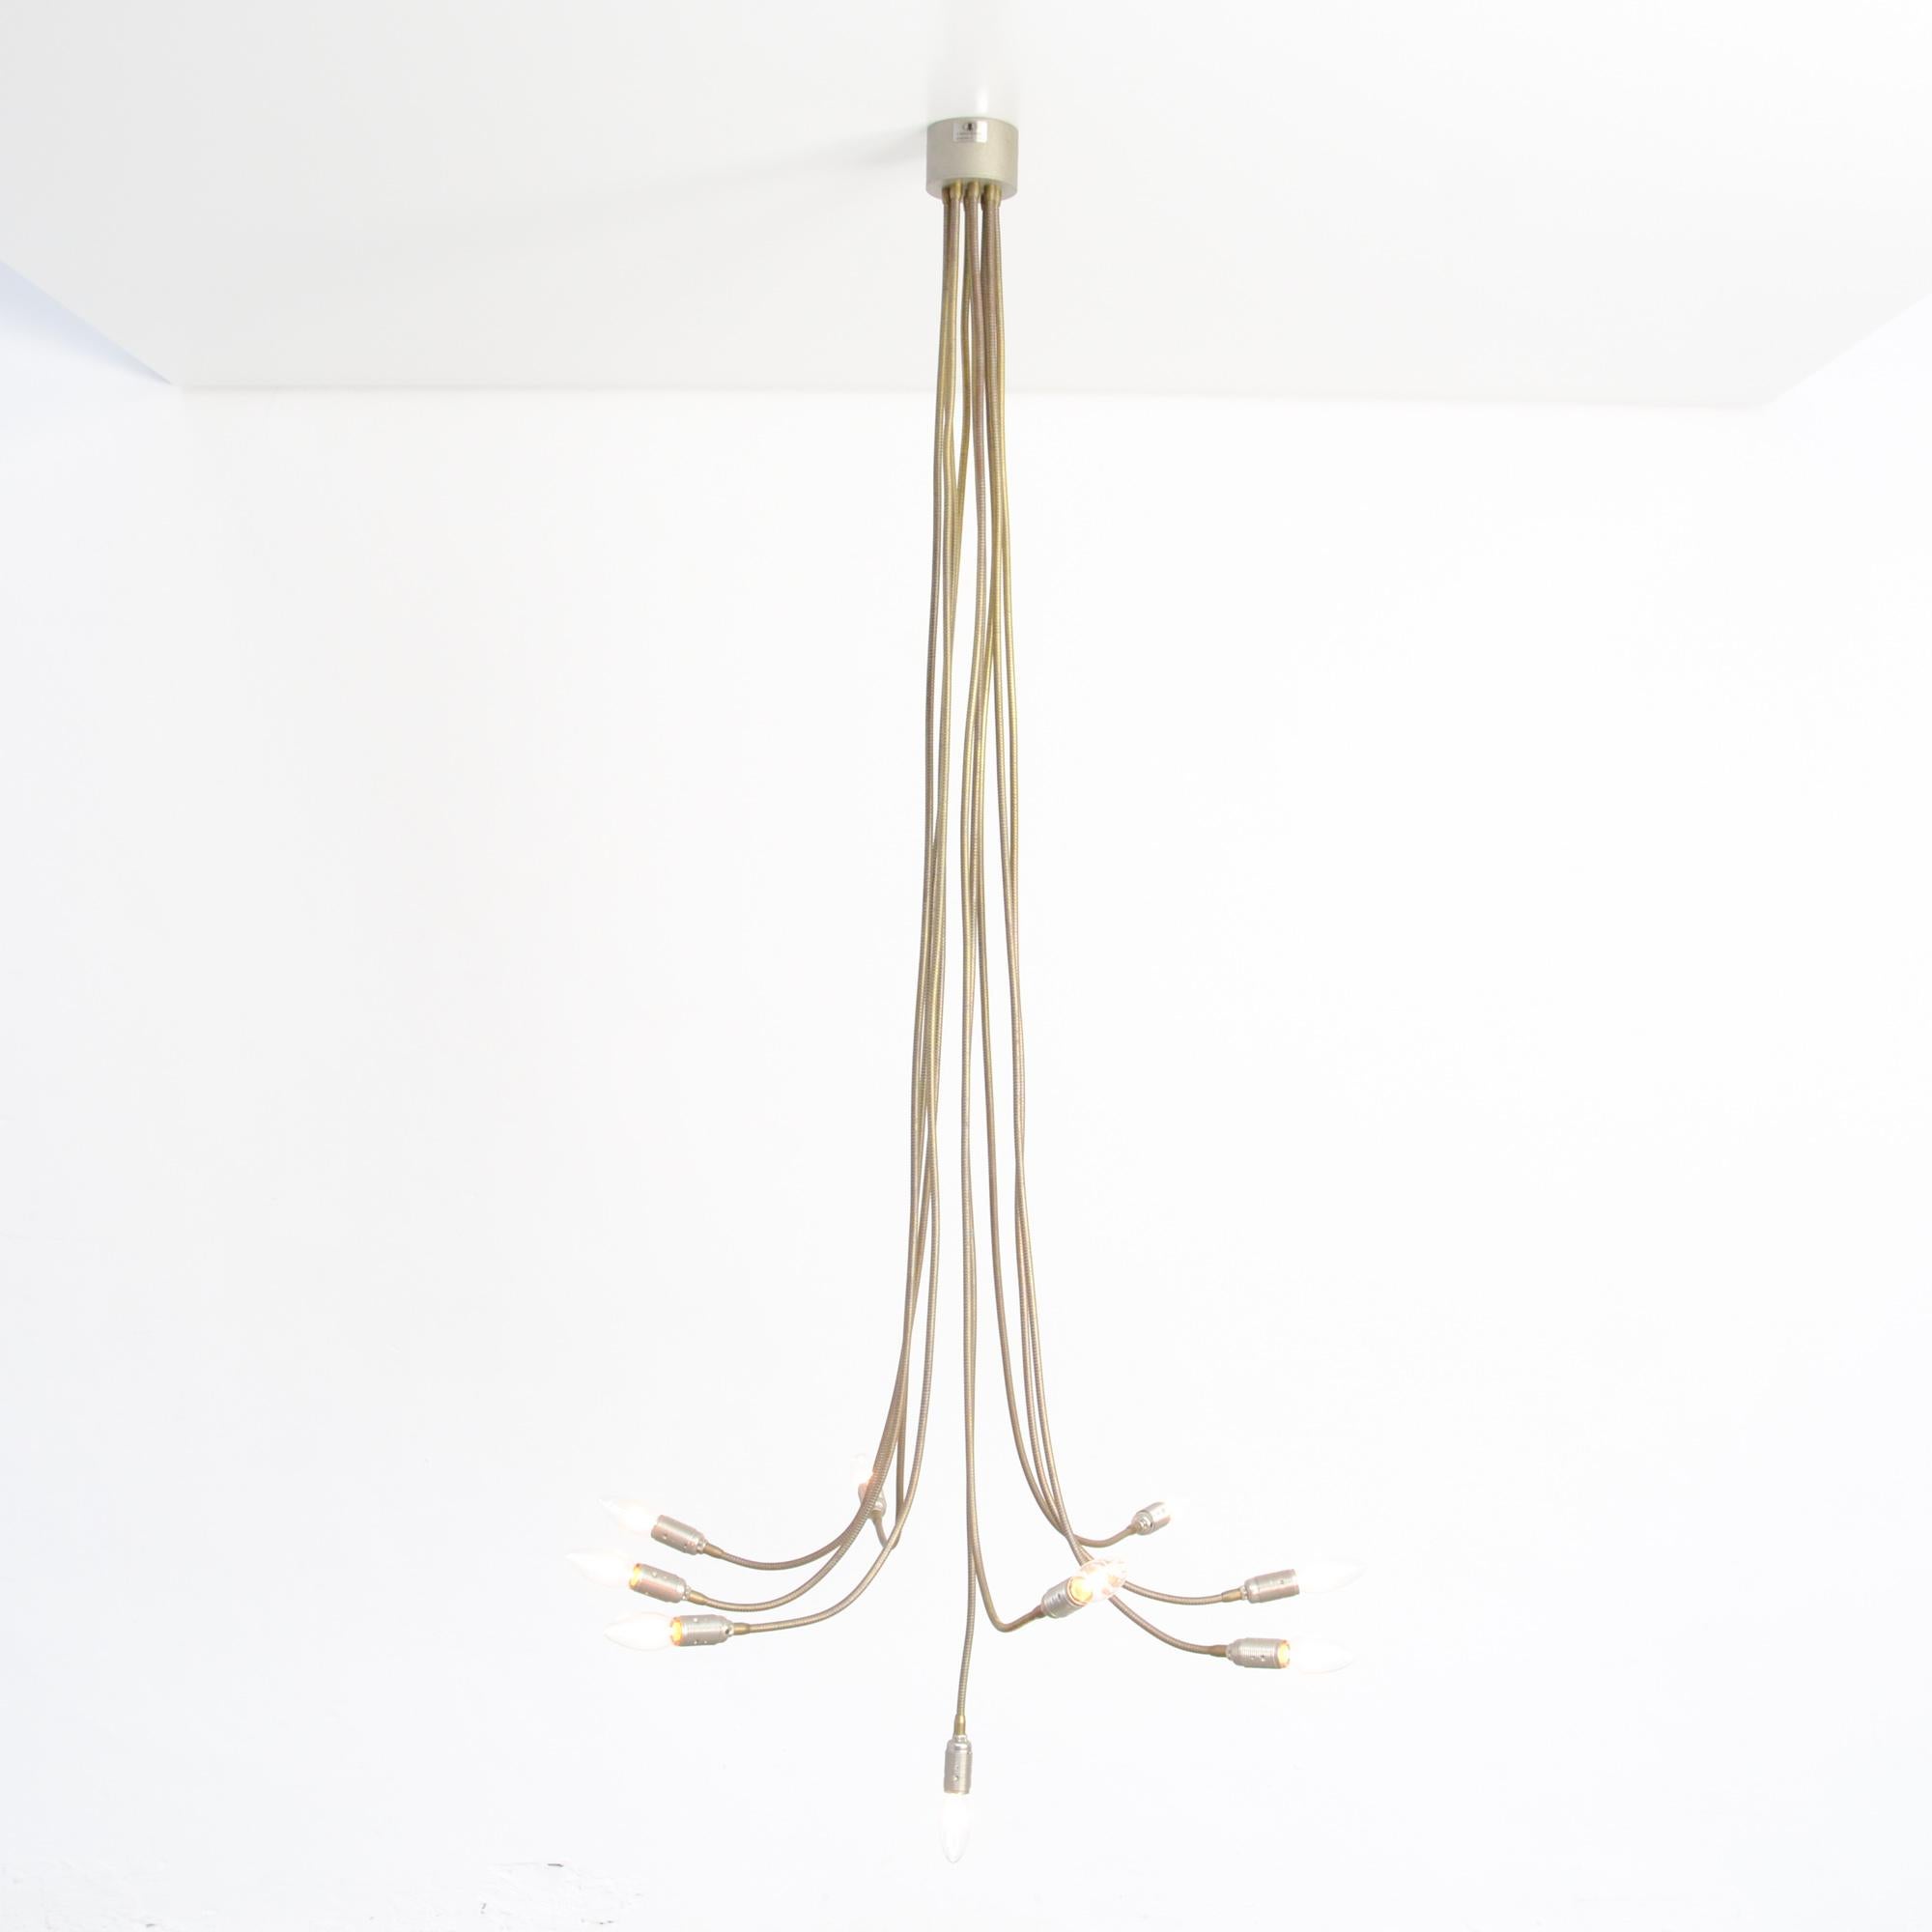 Turciu 9 Wall or Ceiling Lamp by Enzo Catellani for Catellani & Smith 3